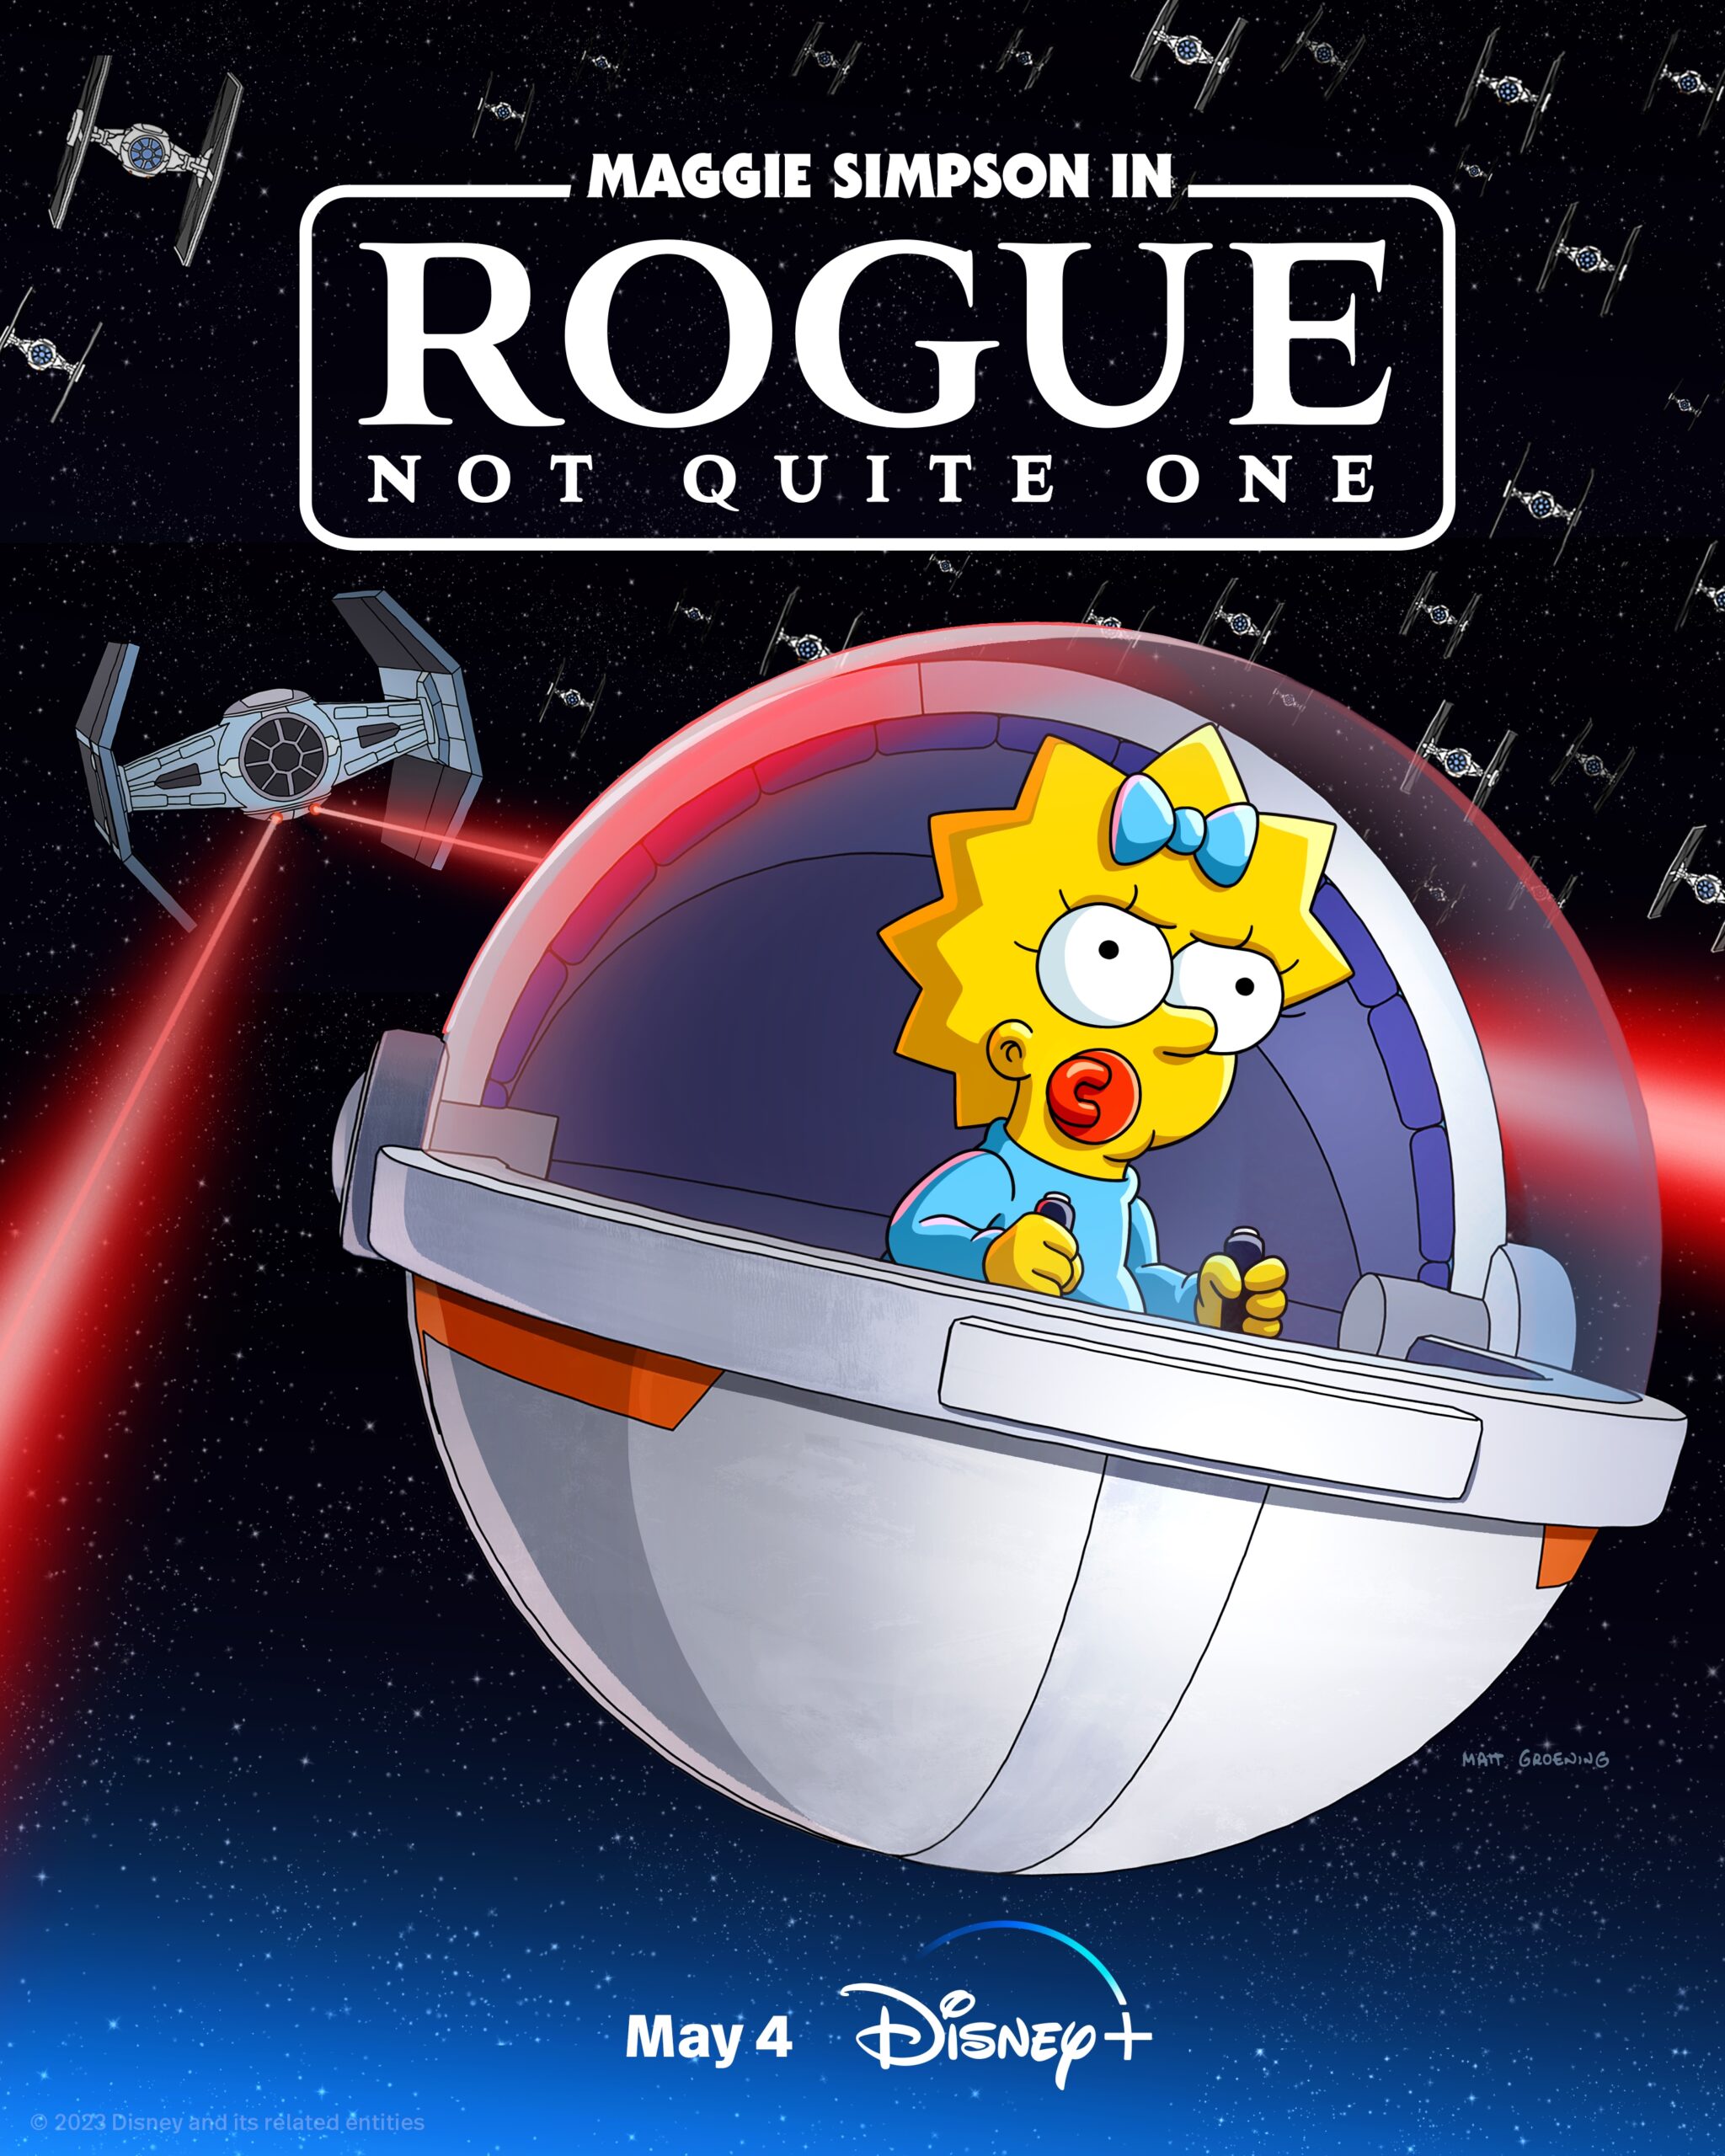 On their way to daycare, Homer loses track of Maggie who hops in Grogu’s hovering pram for a hyperspace-hopping adventure across the galaxy. Facing a squadron of Imperial TIE fighters, Maggie brings the battle to Springfield in this epic short celebrating all things Star Wars.